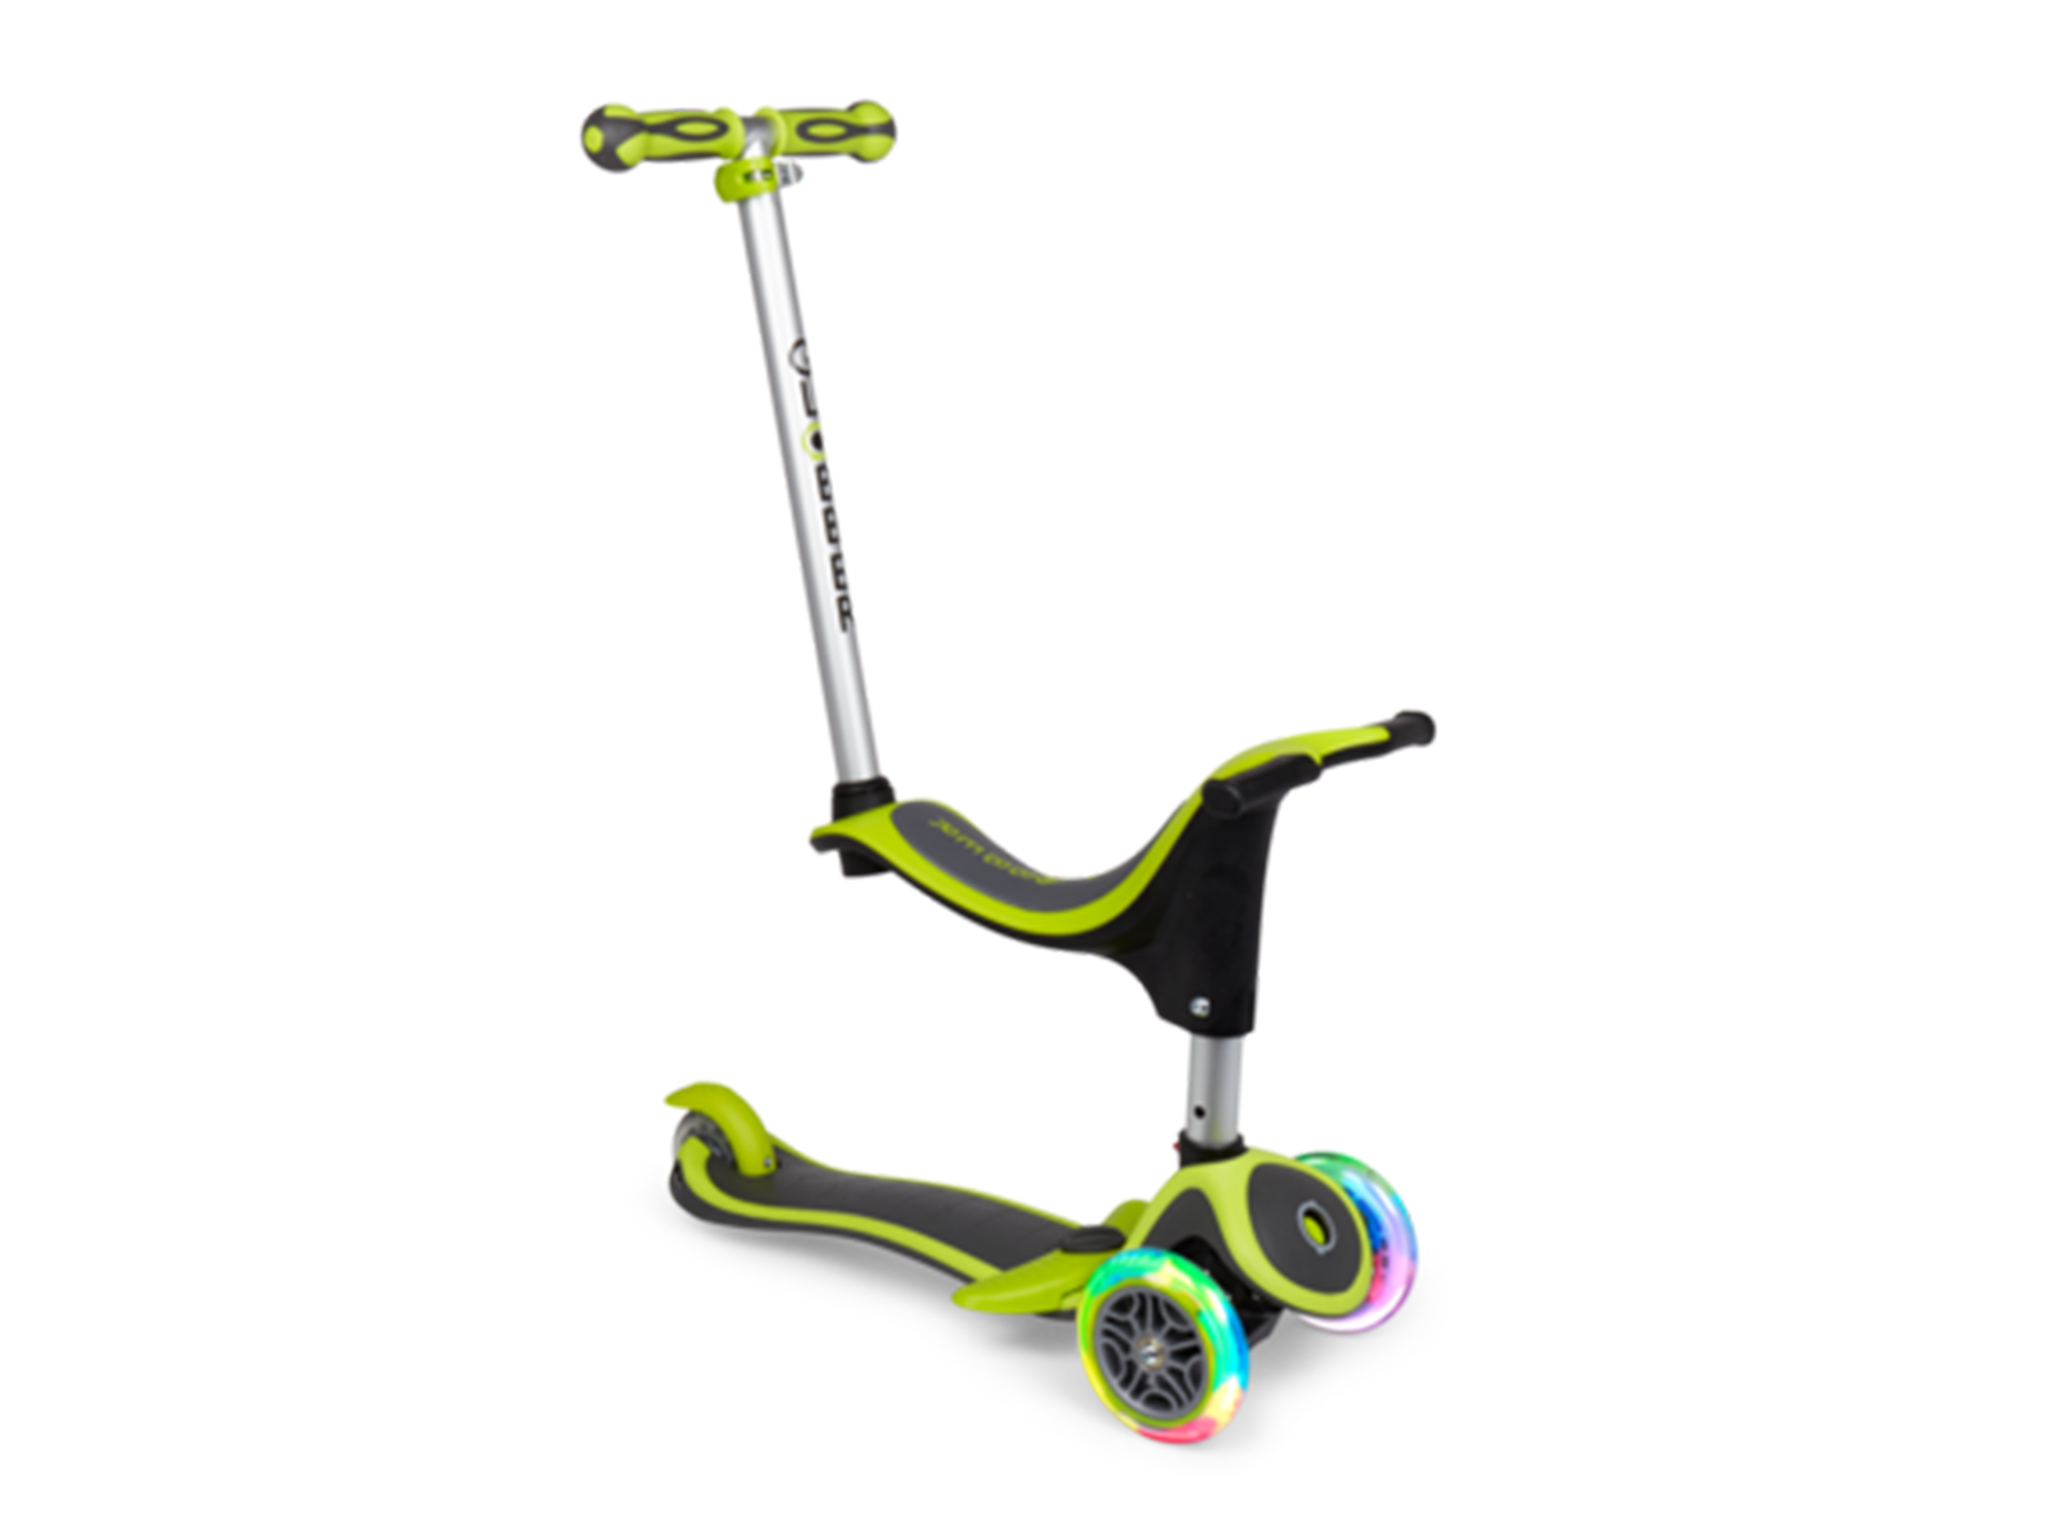 scooter for 2 year old child